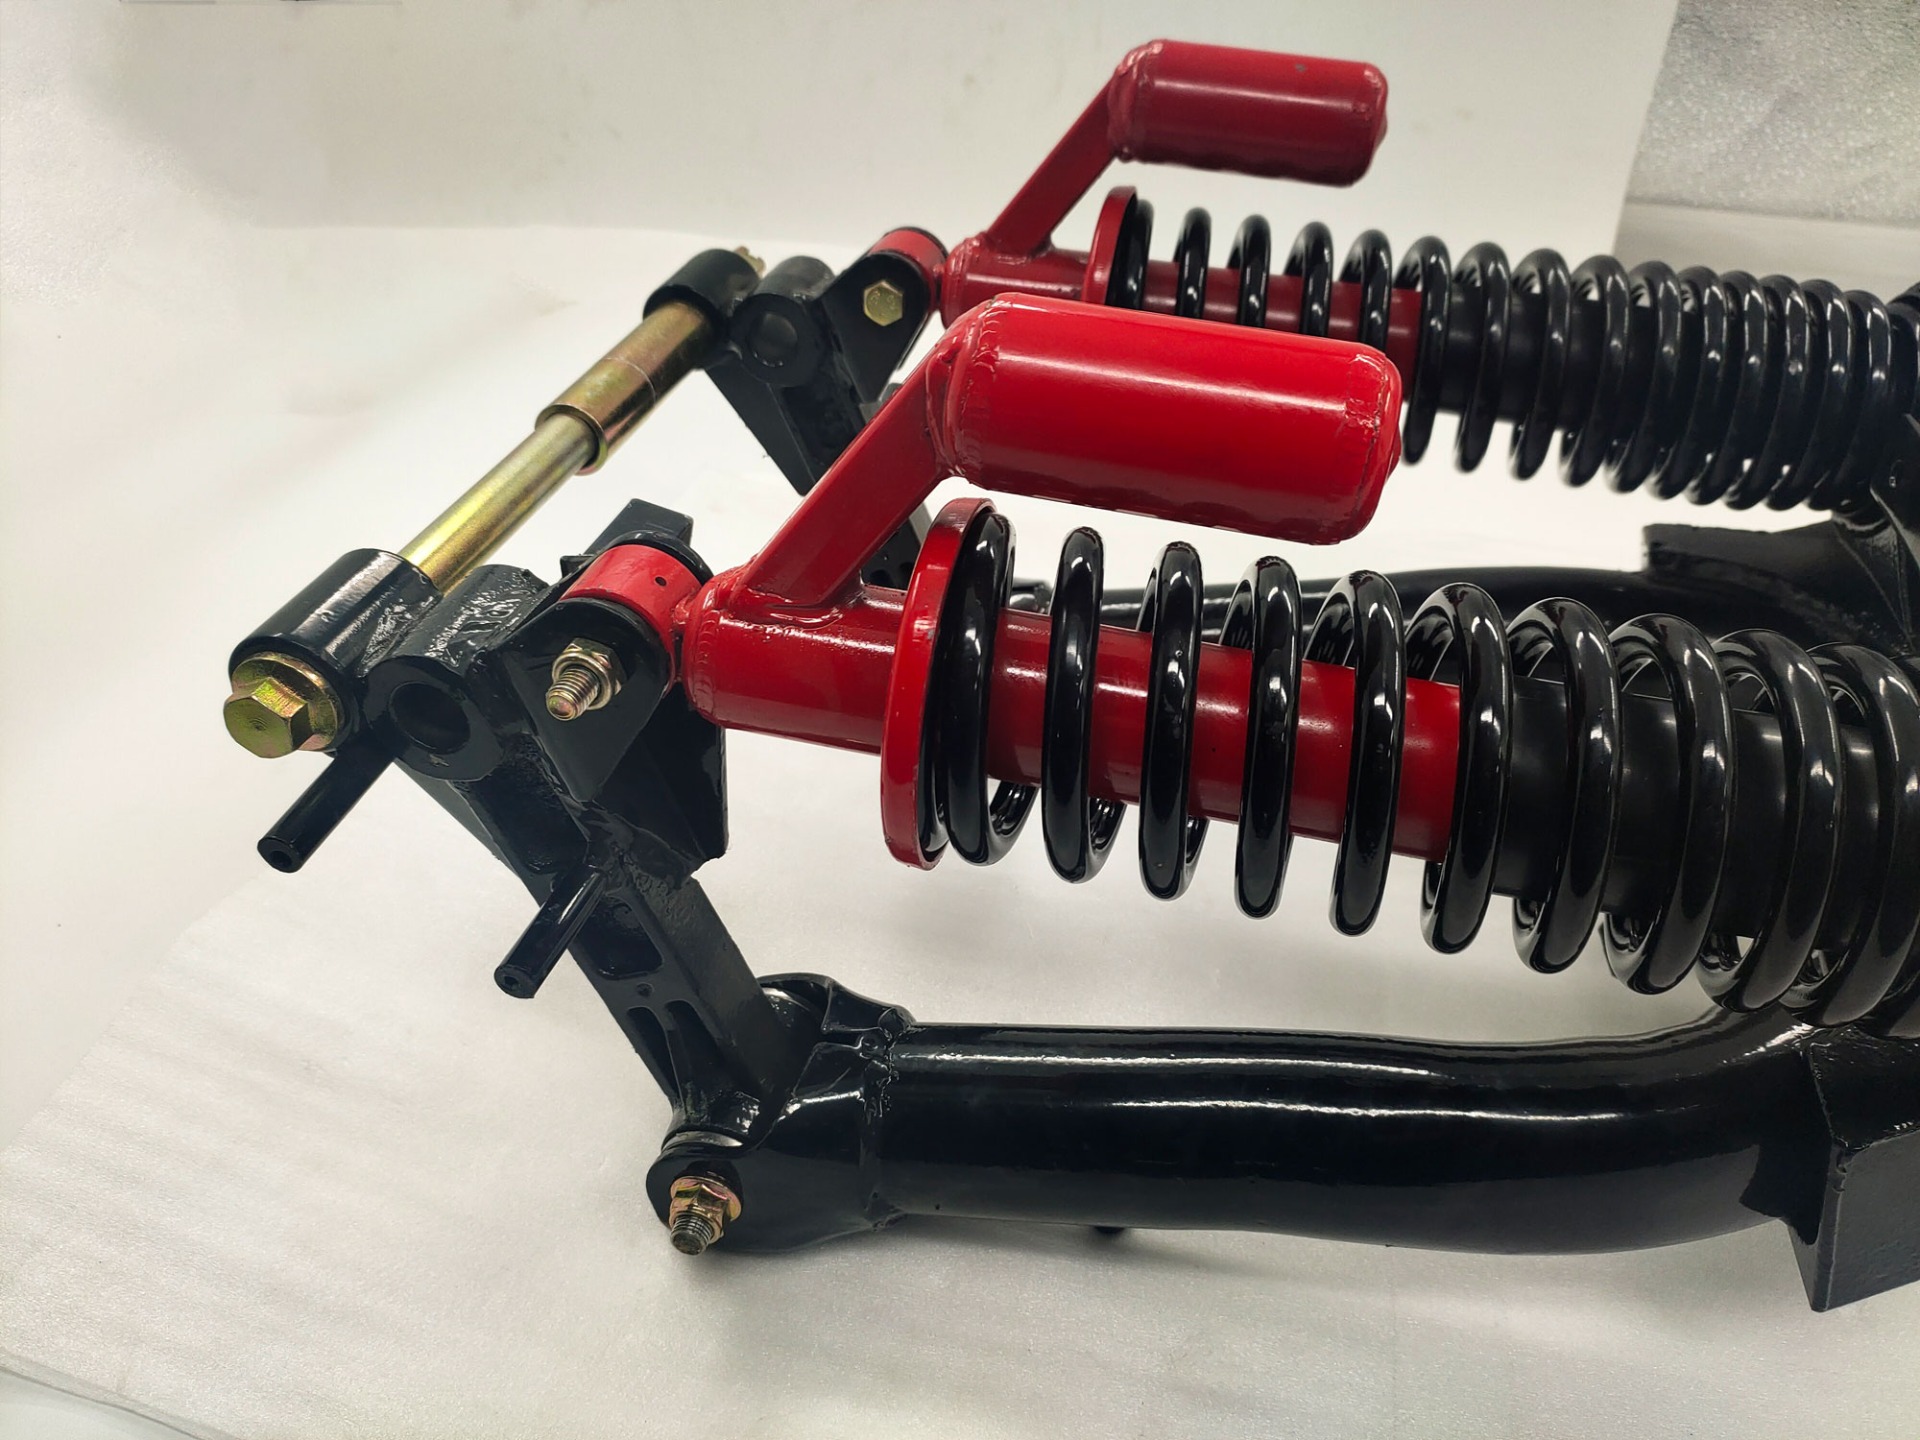 OEM suspension motorcycle rear shock absorber DAYANG Tricycle item packing pcs class motorcycles accept origin fit quality